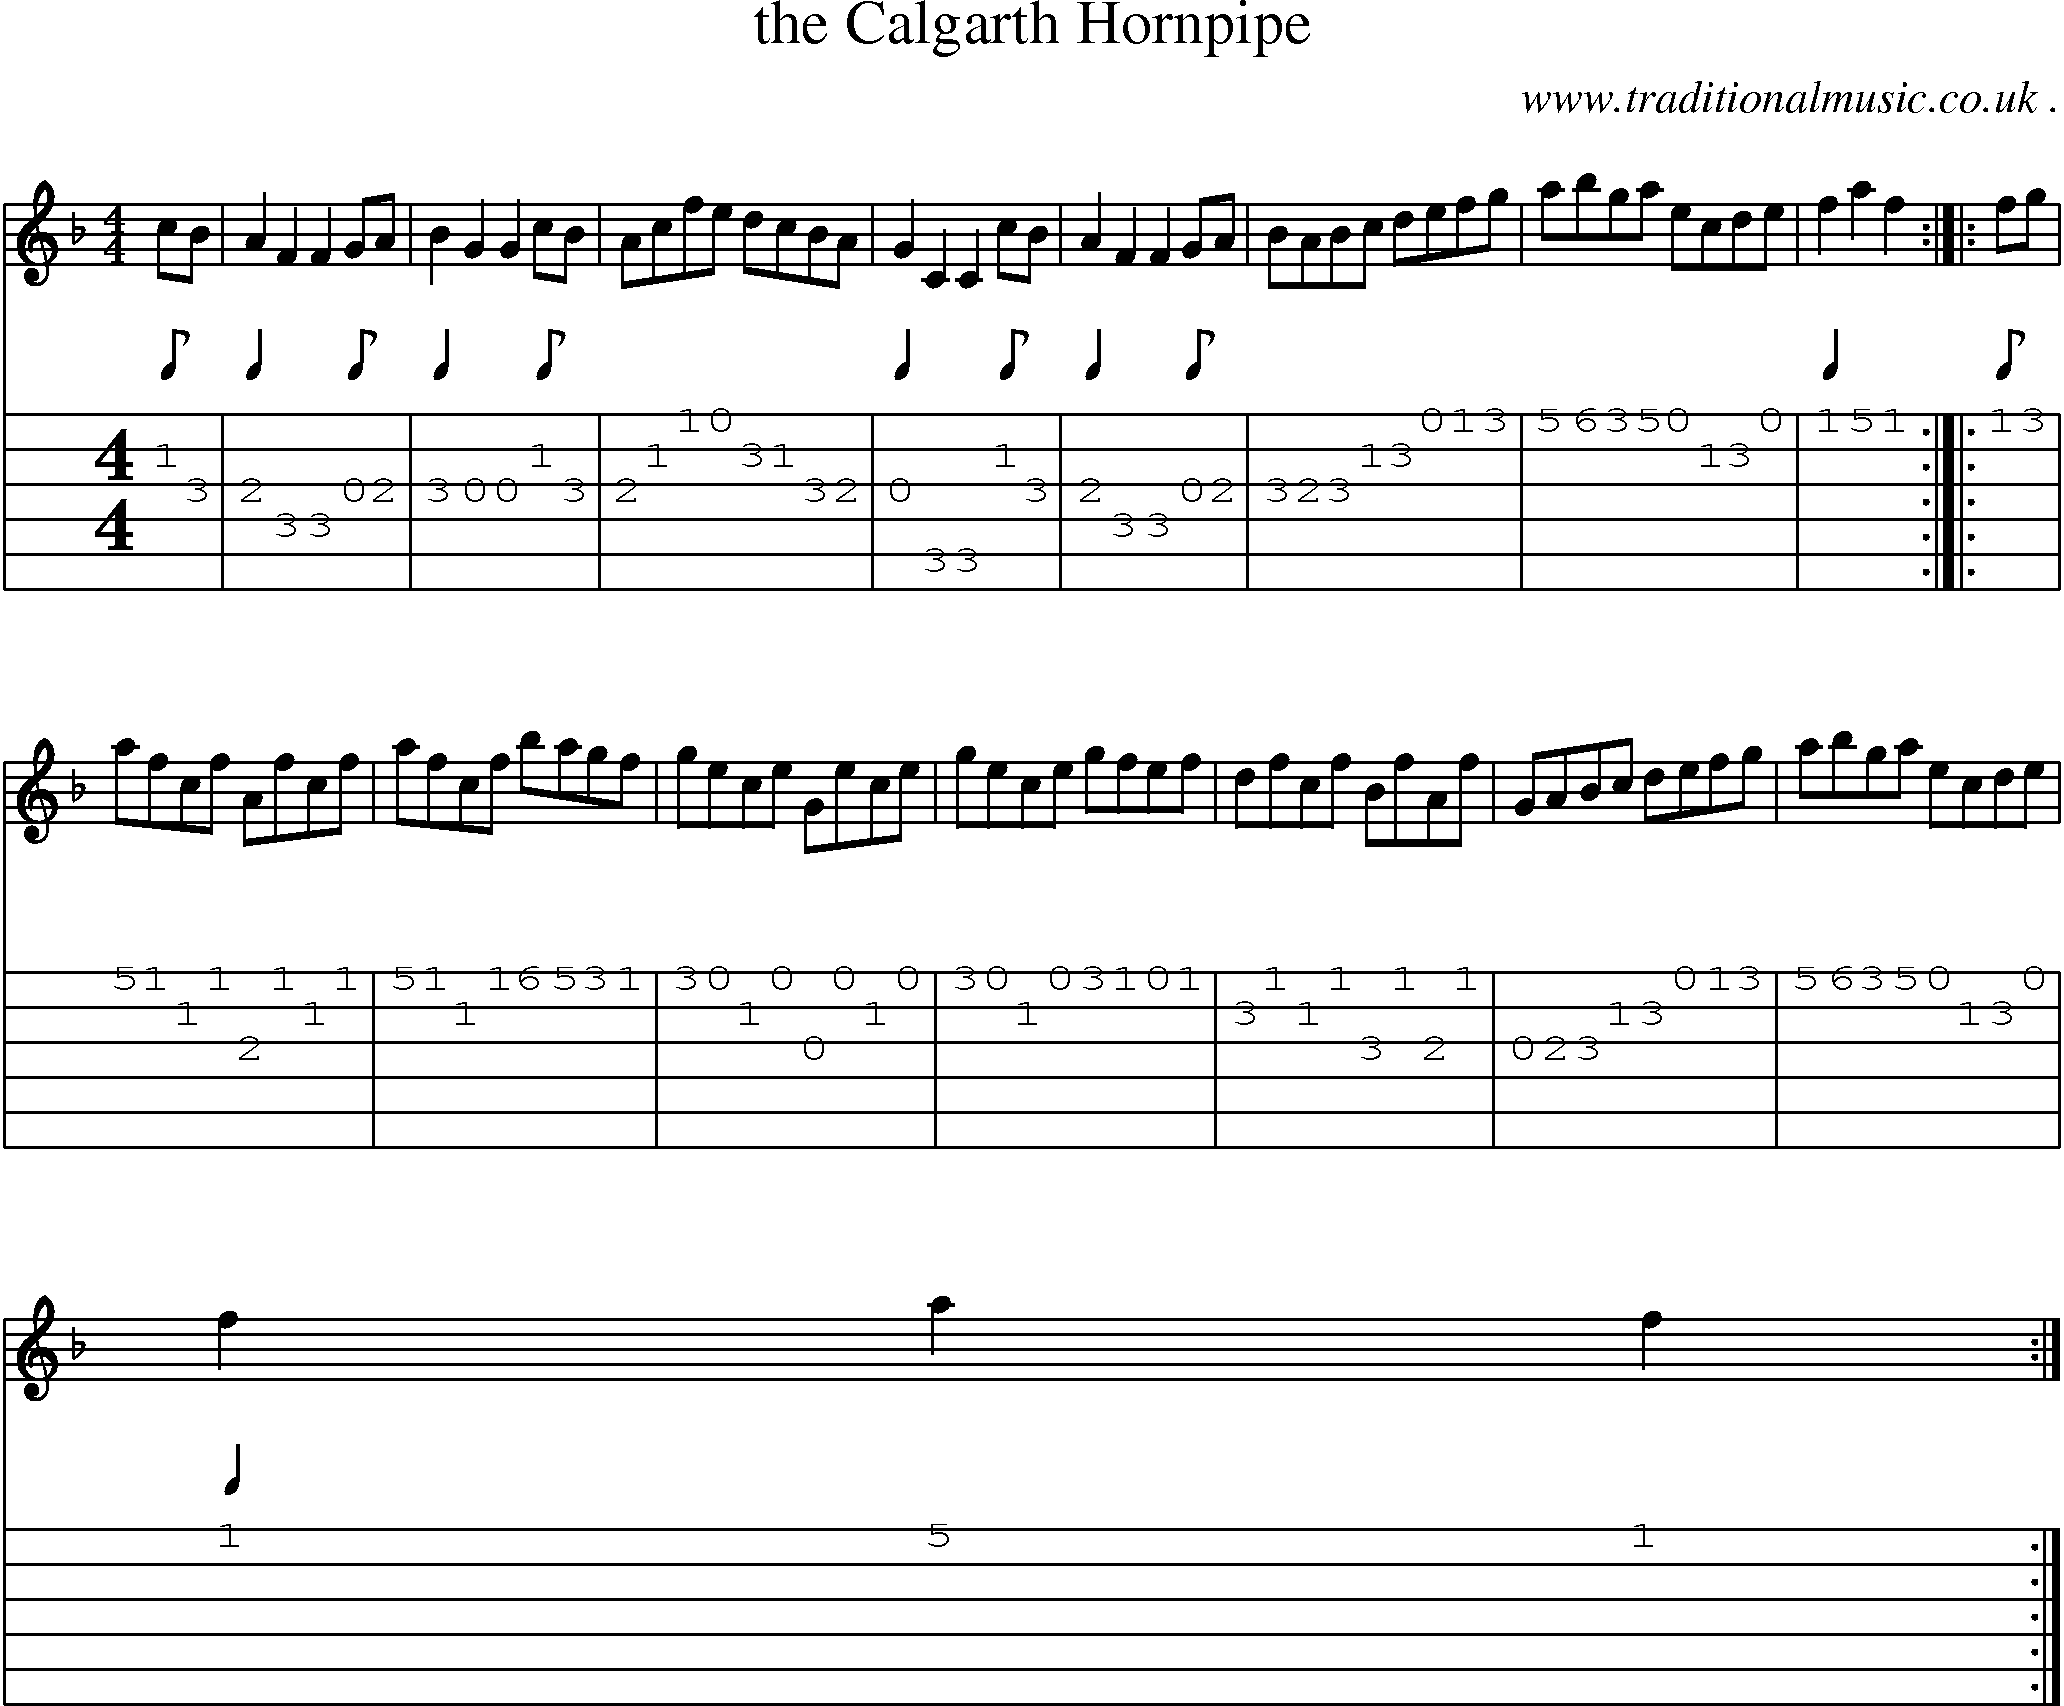 Sheet-Music and Guitar Tabs for The Calgarth Hornpipe